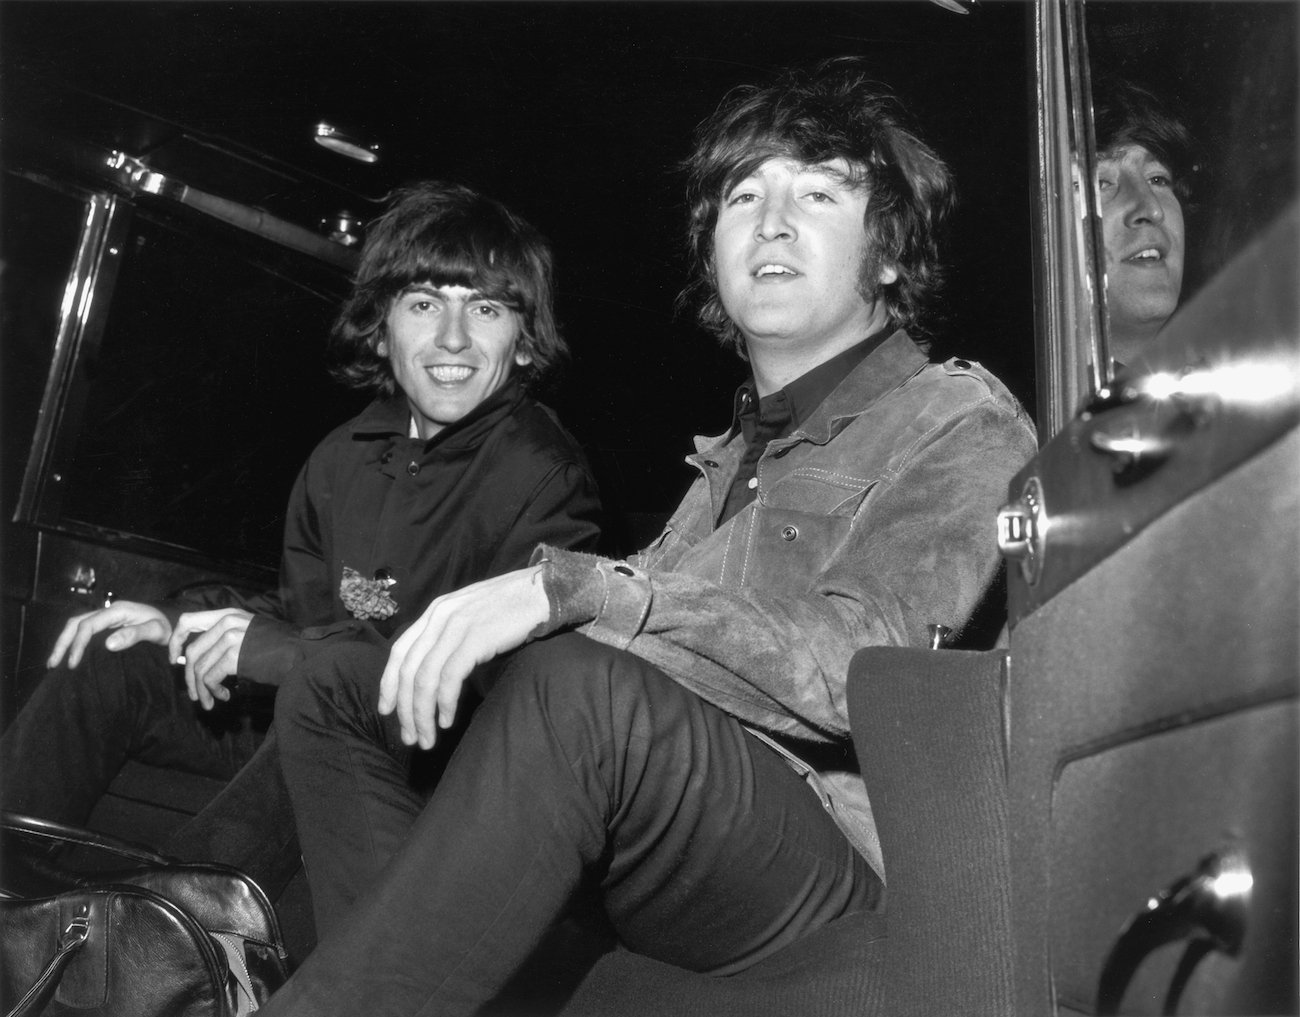 George Harrison and John Lennon at London Airport.